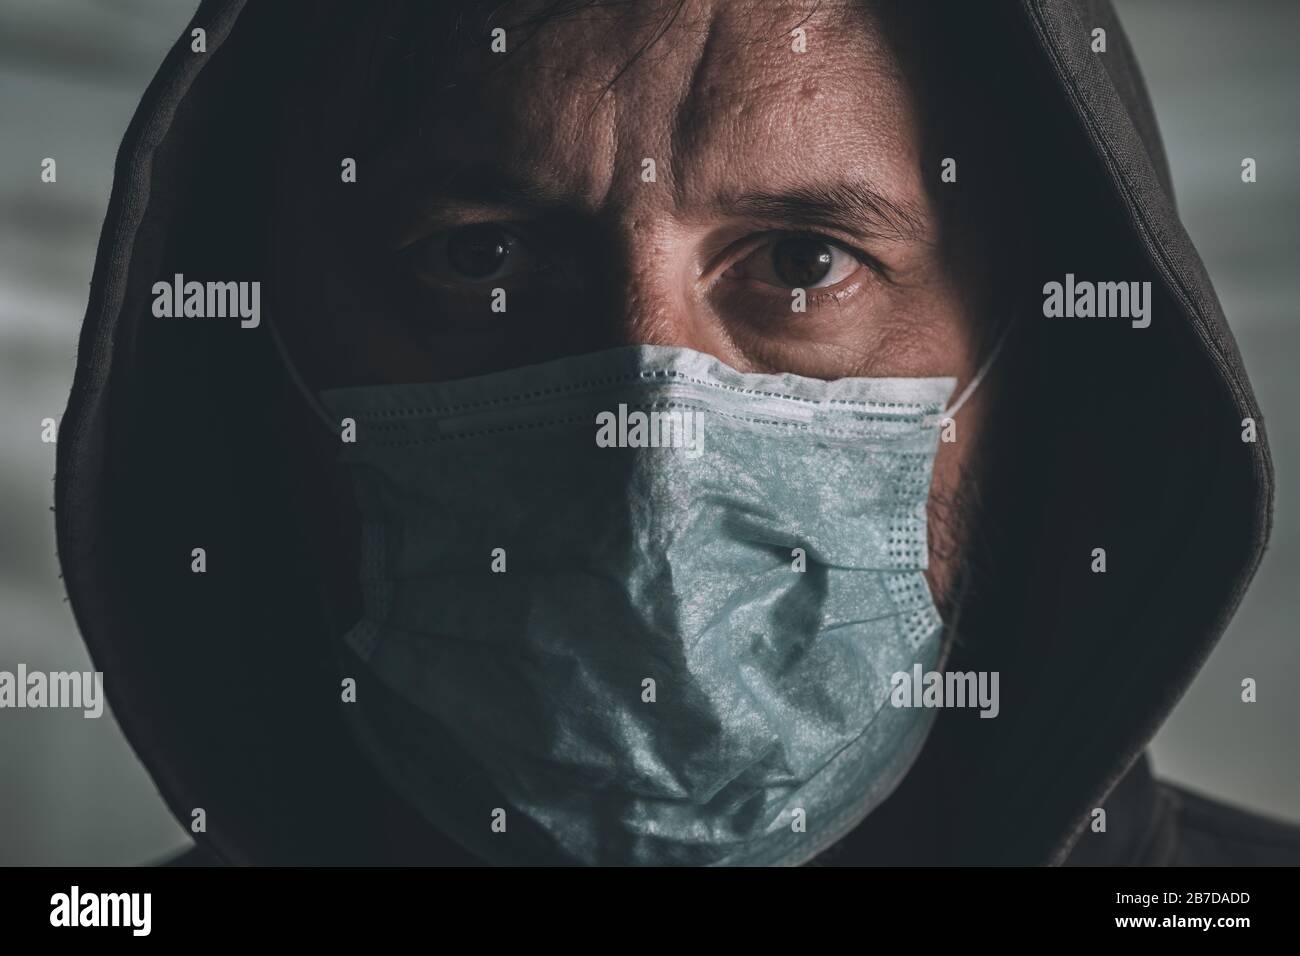 Afraid man with disposable respiratory mask covering his face during epidemic virus outbreak Stock Photo